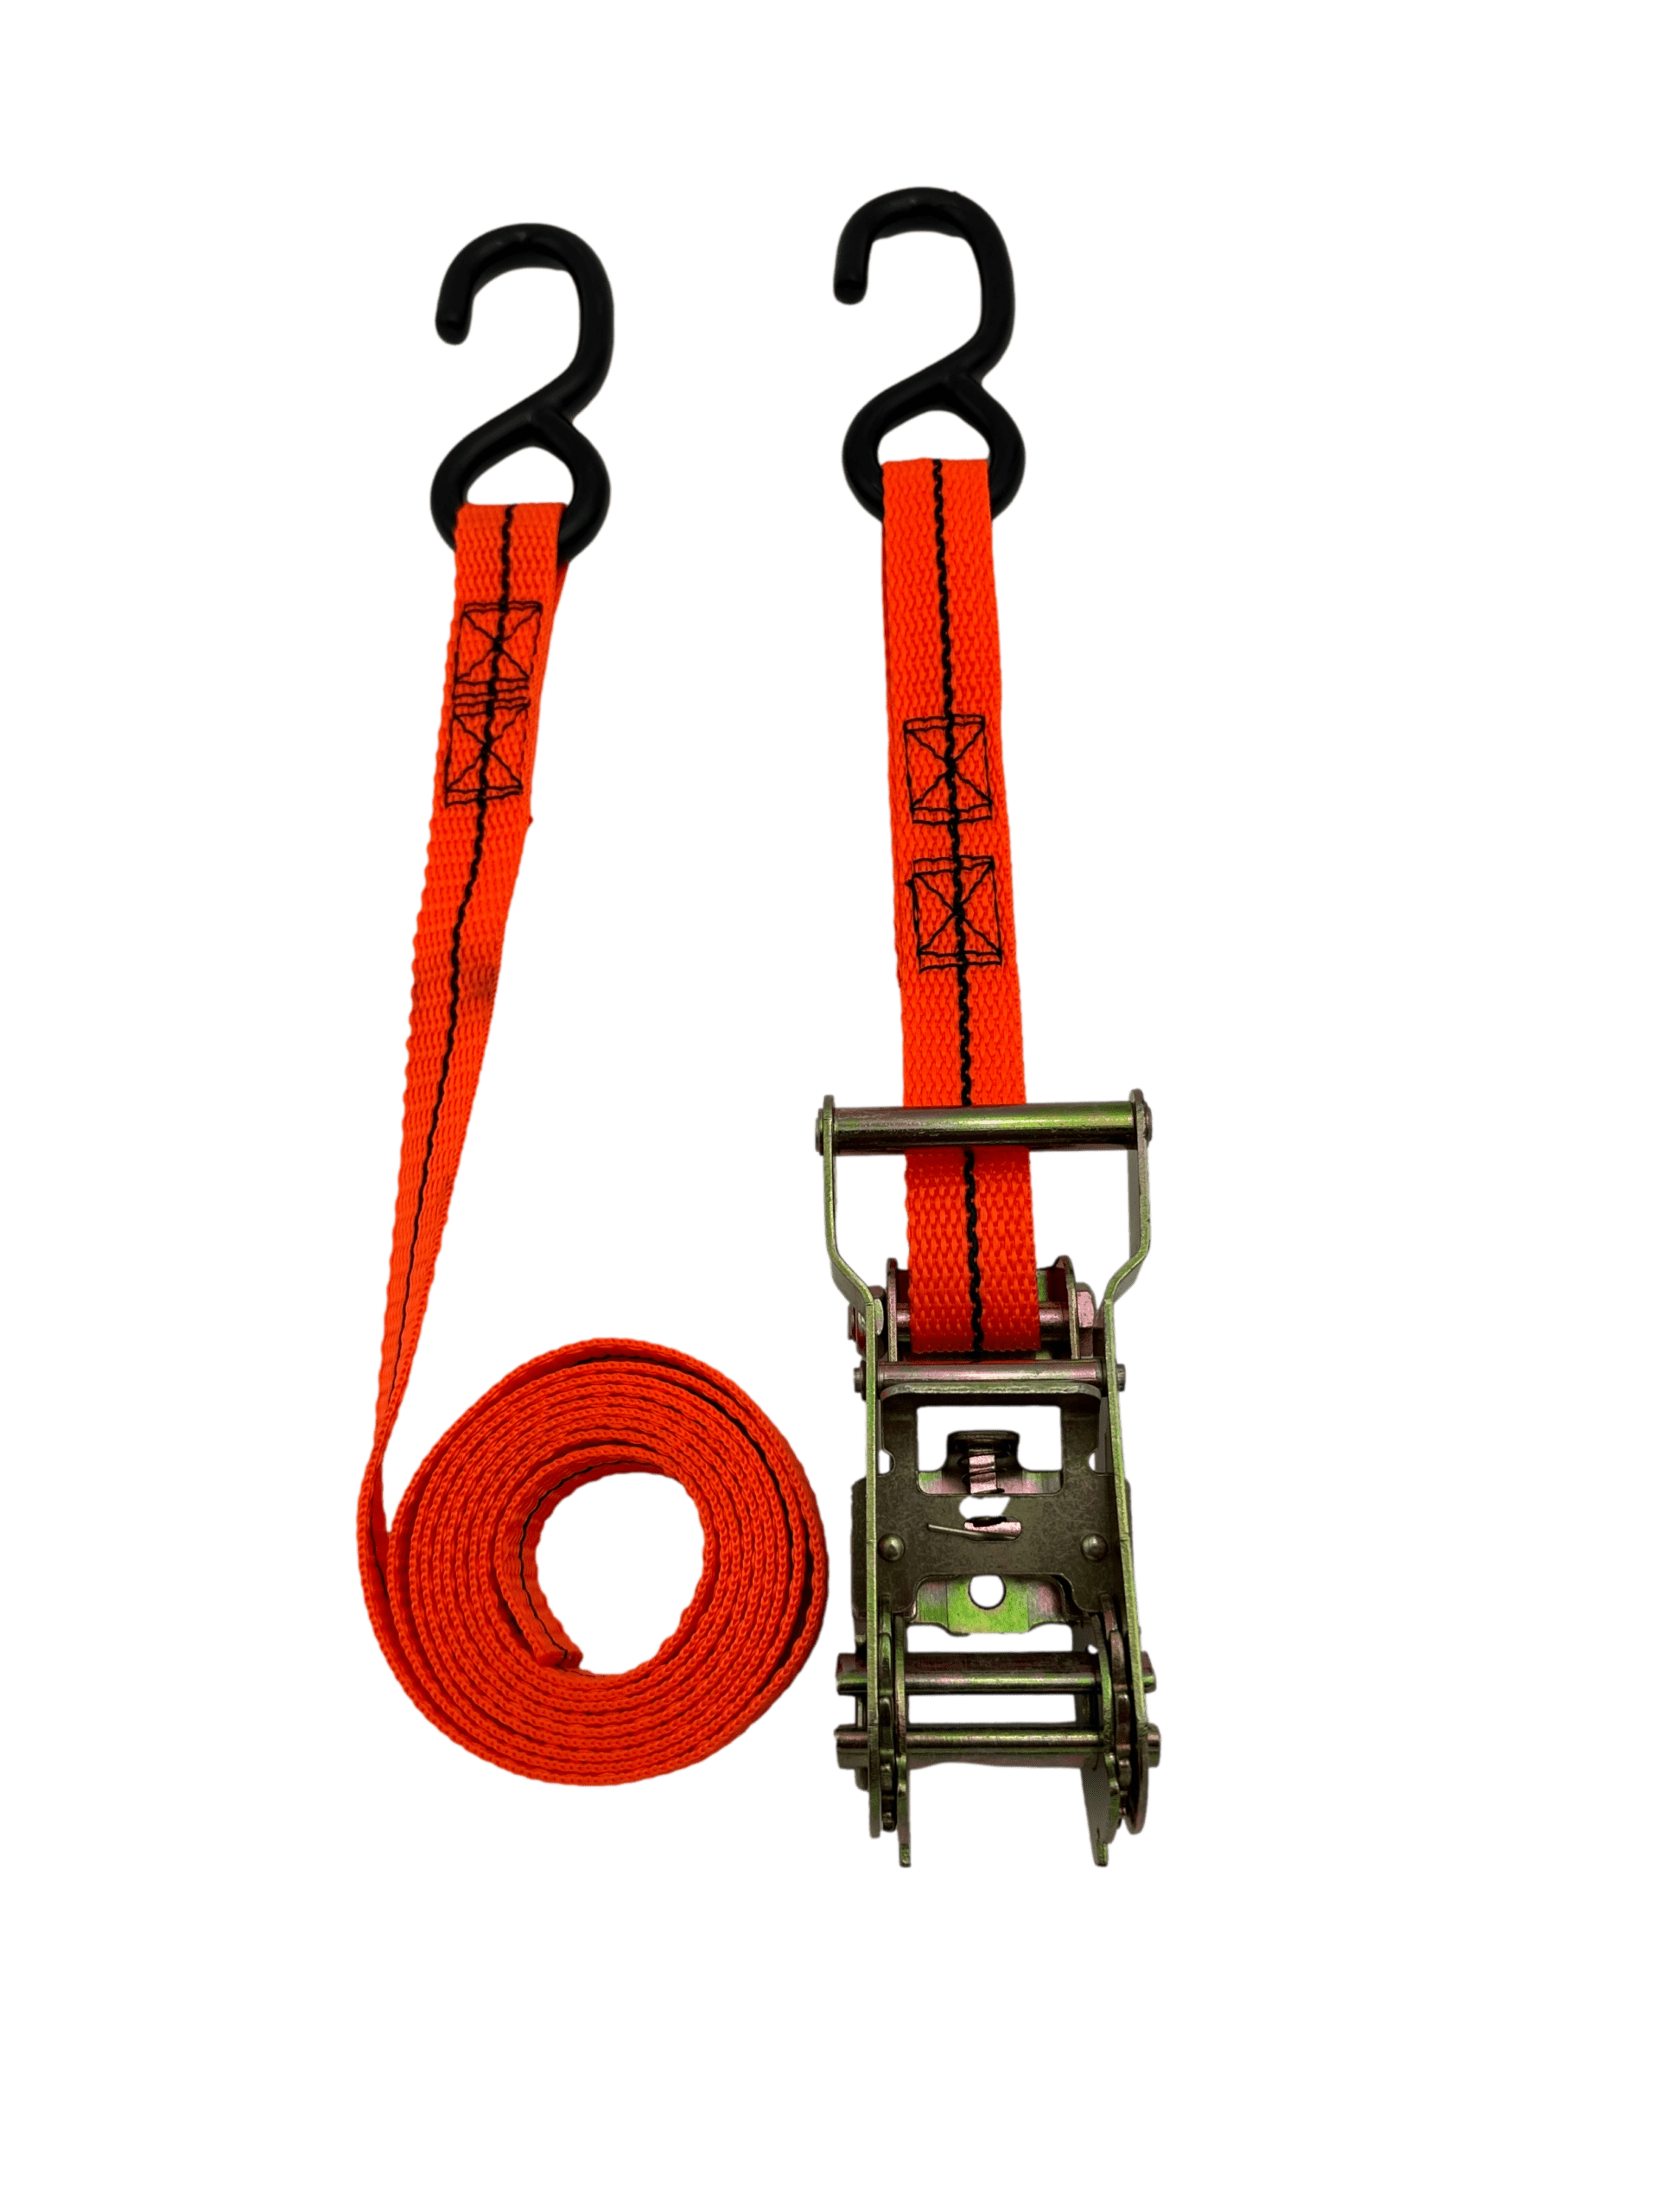 [Image description: A close-up image of the 1" Wide Handle Ratchet Tie Down, showcasing its sturdy construction and reliable grip.]